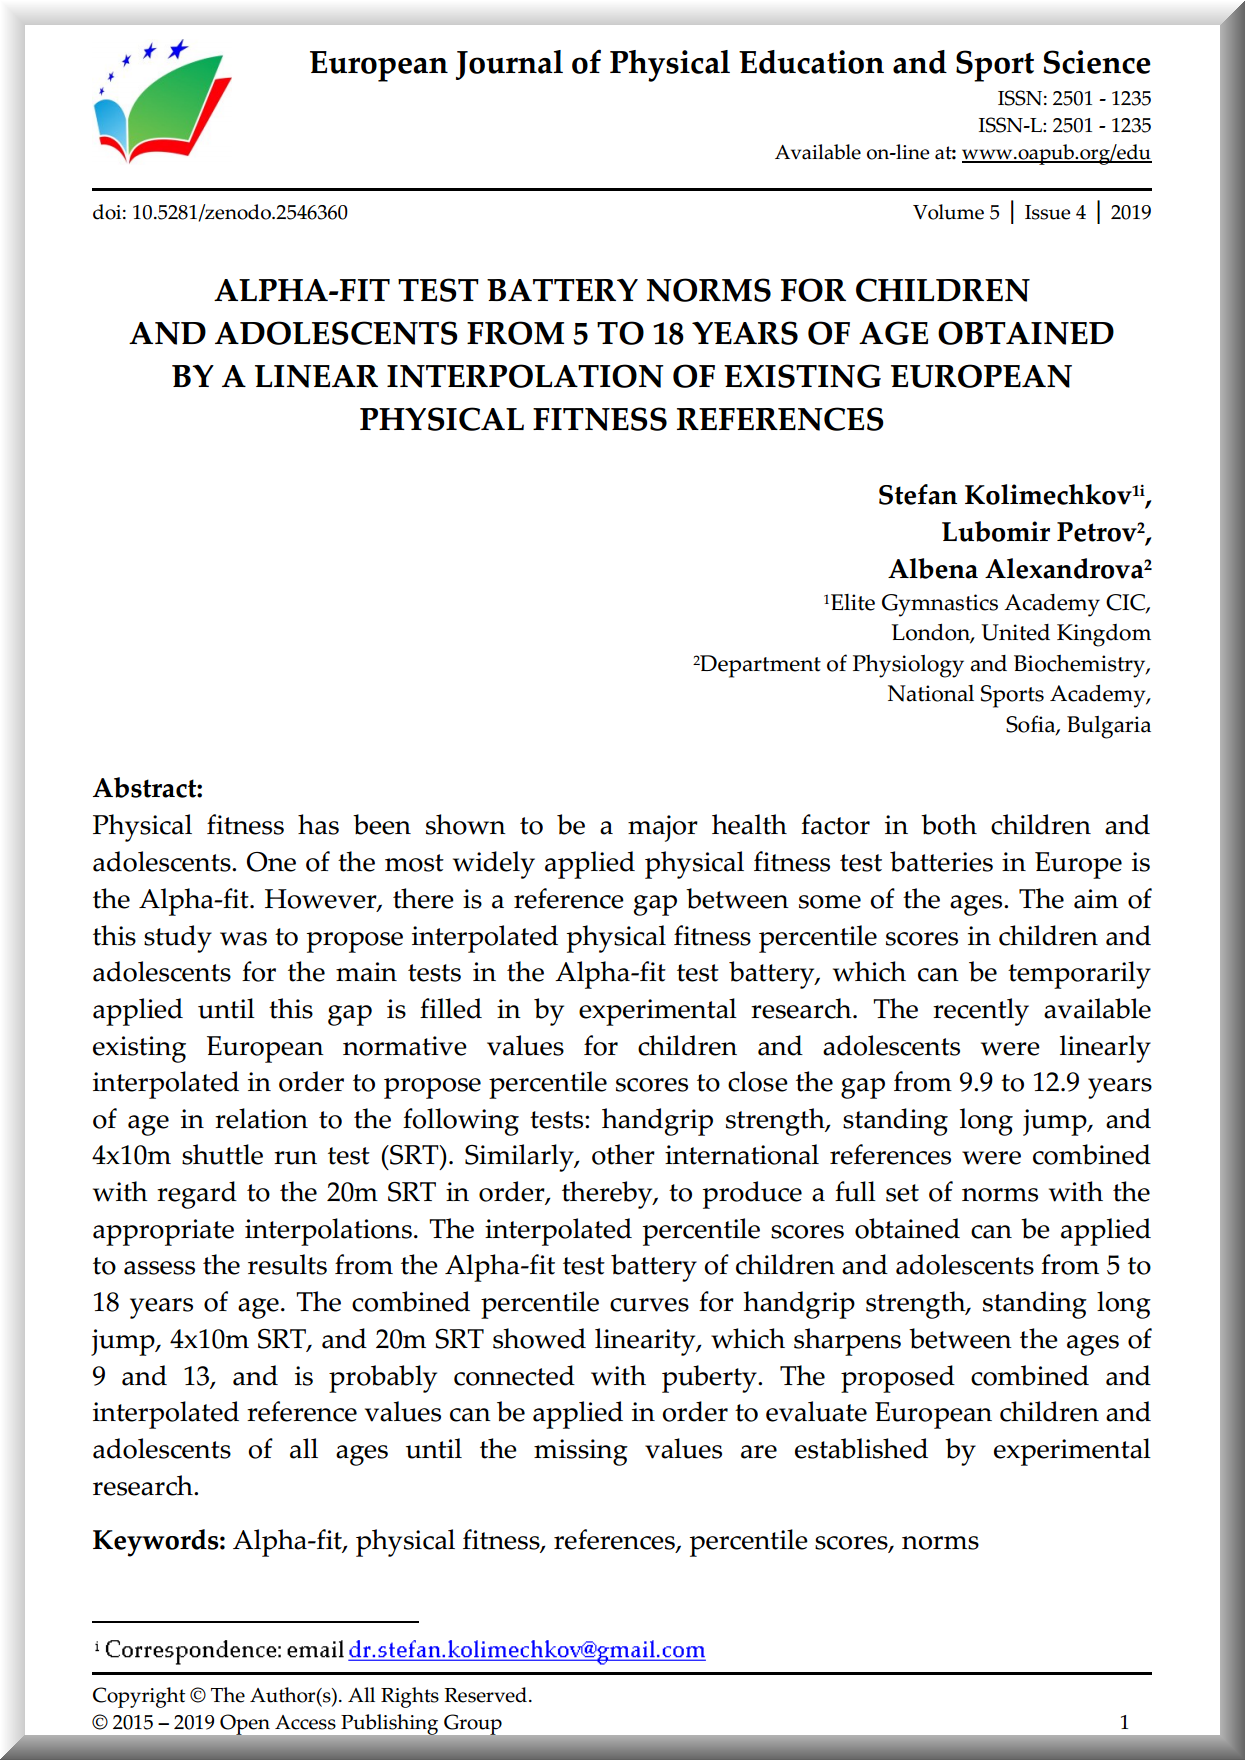 Alpha-fit test battery norms for children and adolescents (2019)